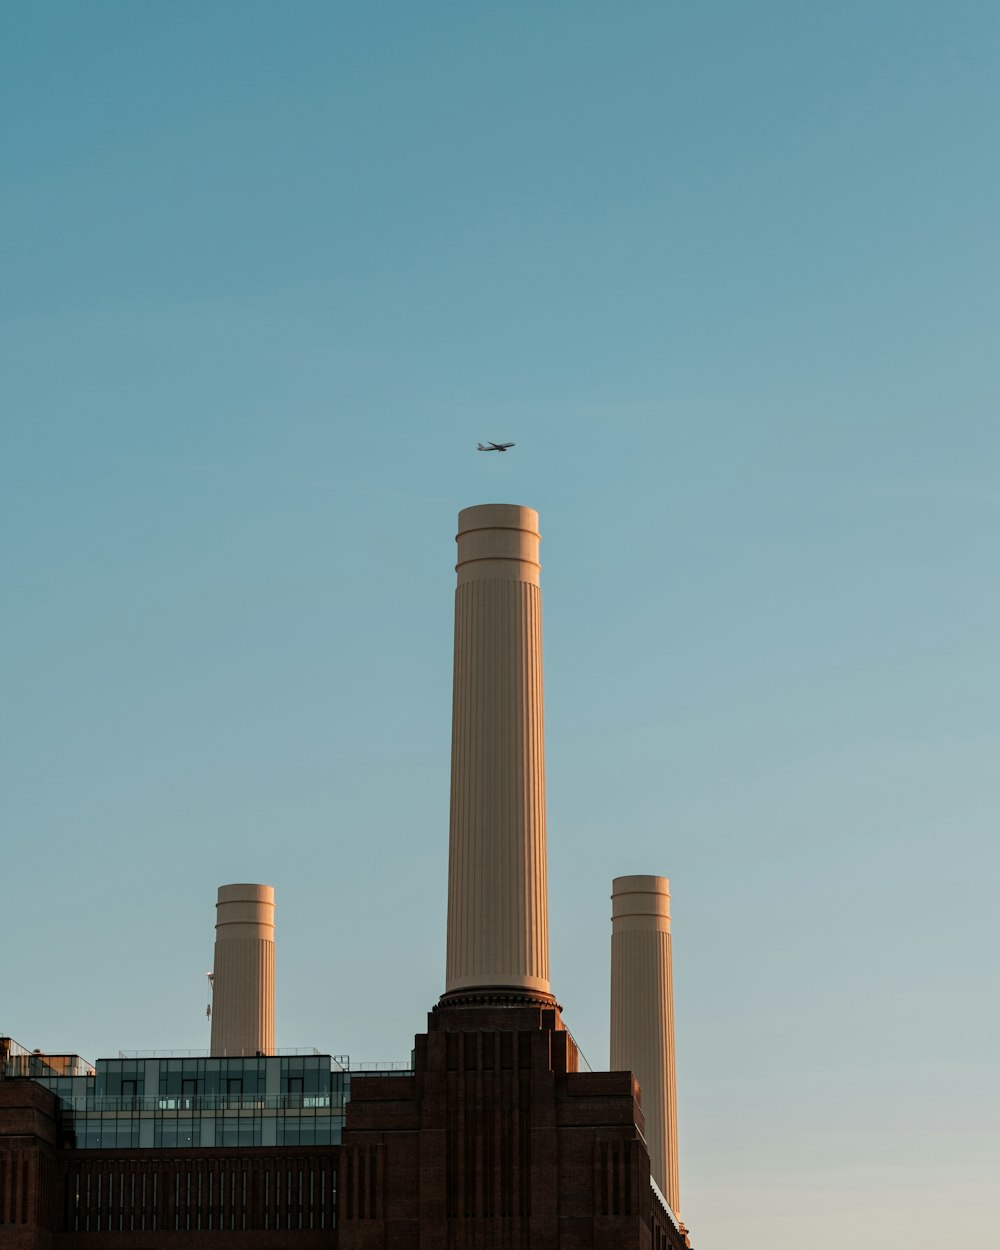 an airplane is flying over a building with chimneys